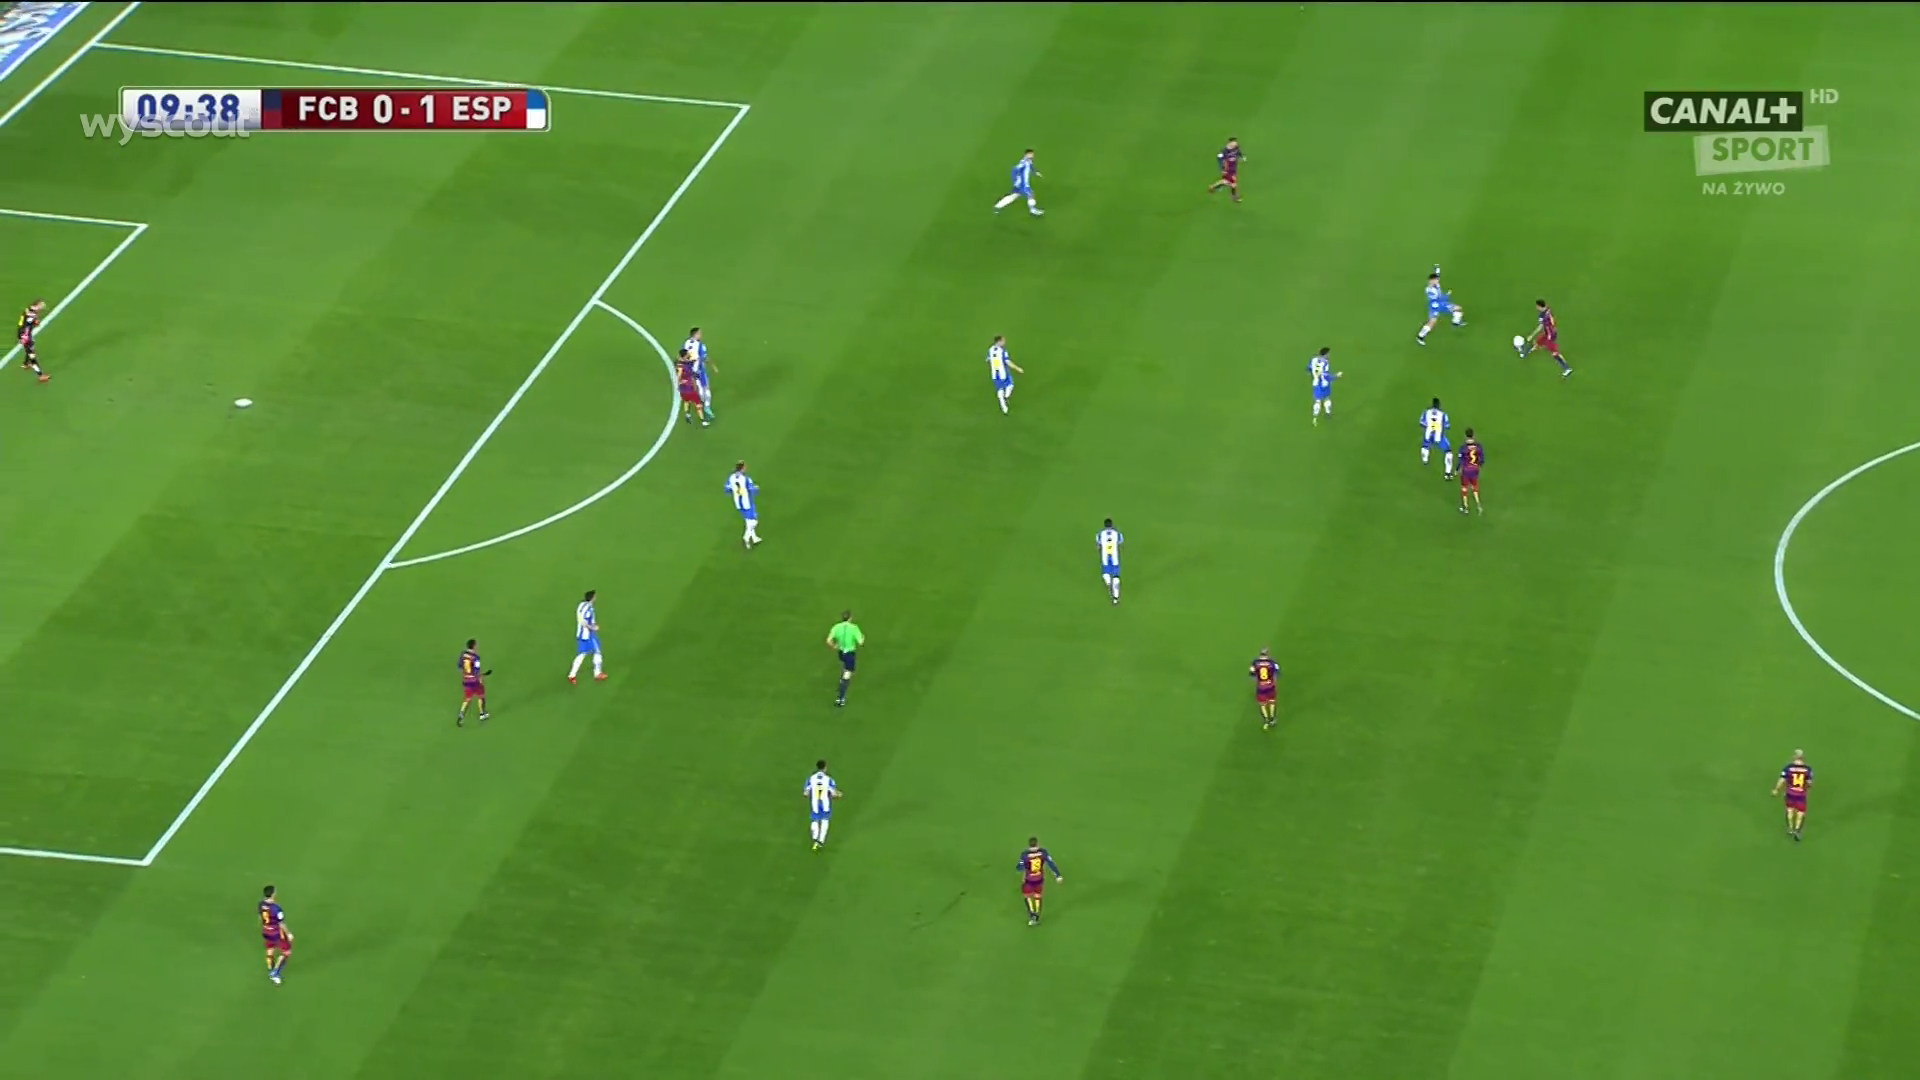 Barcelona's structure before losing possession for Espanyol's goal.